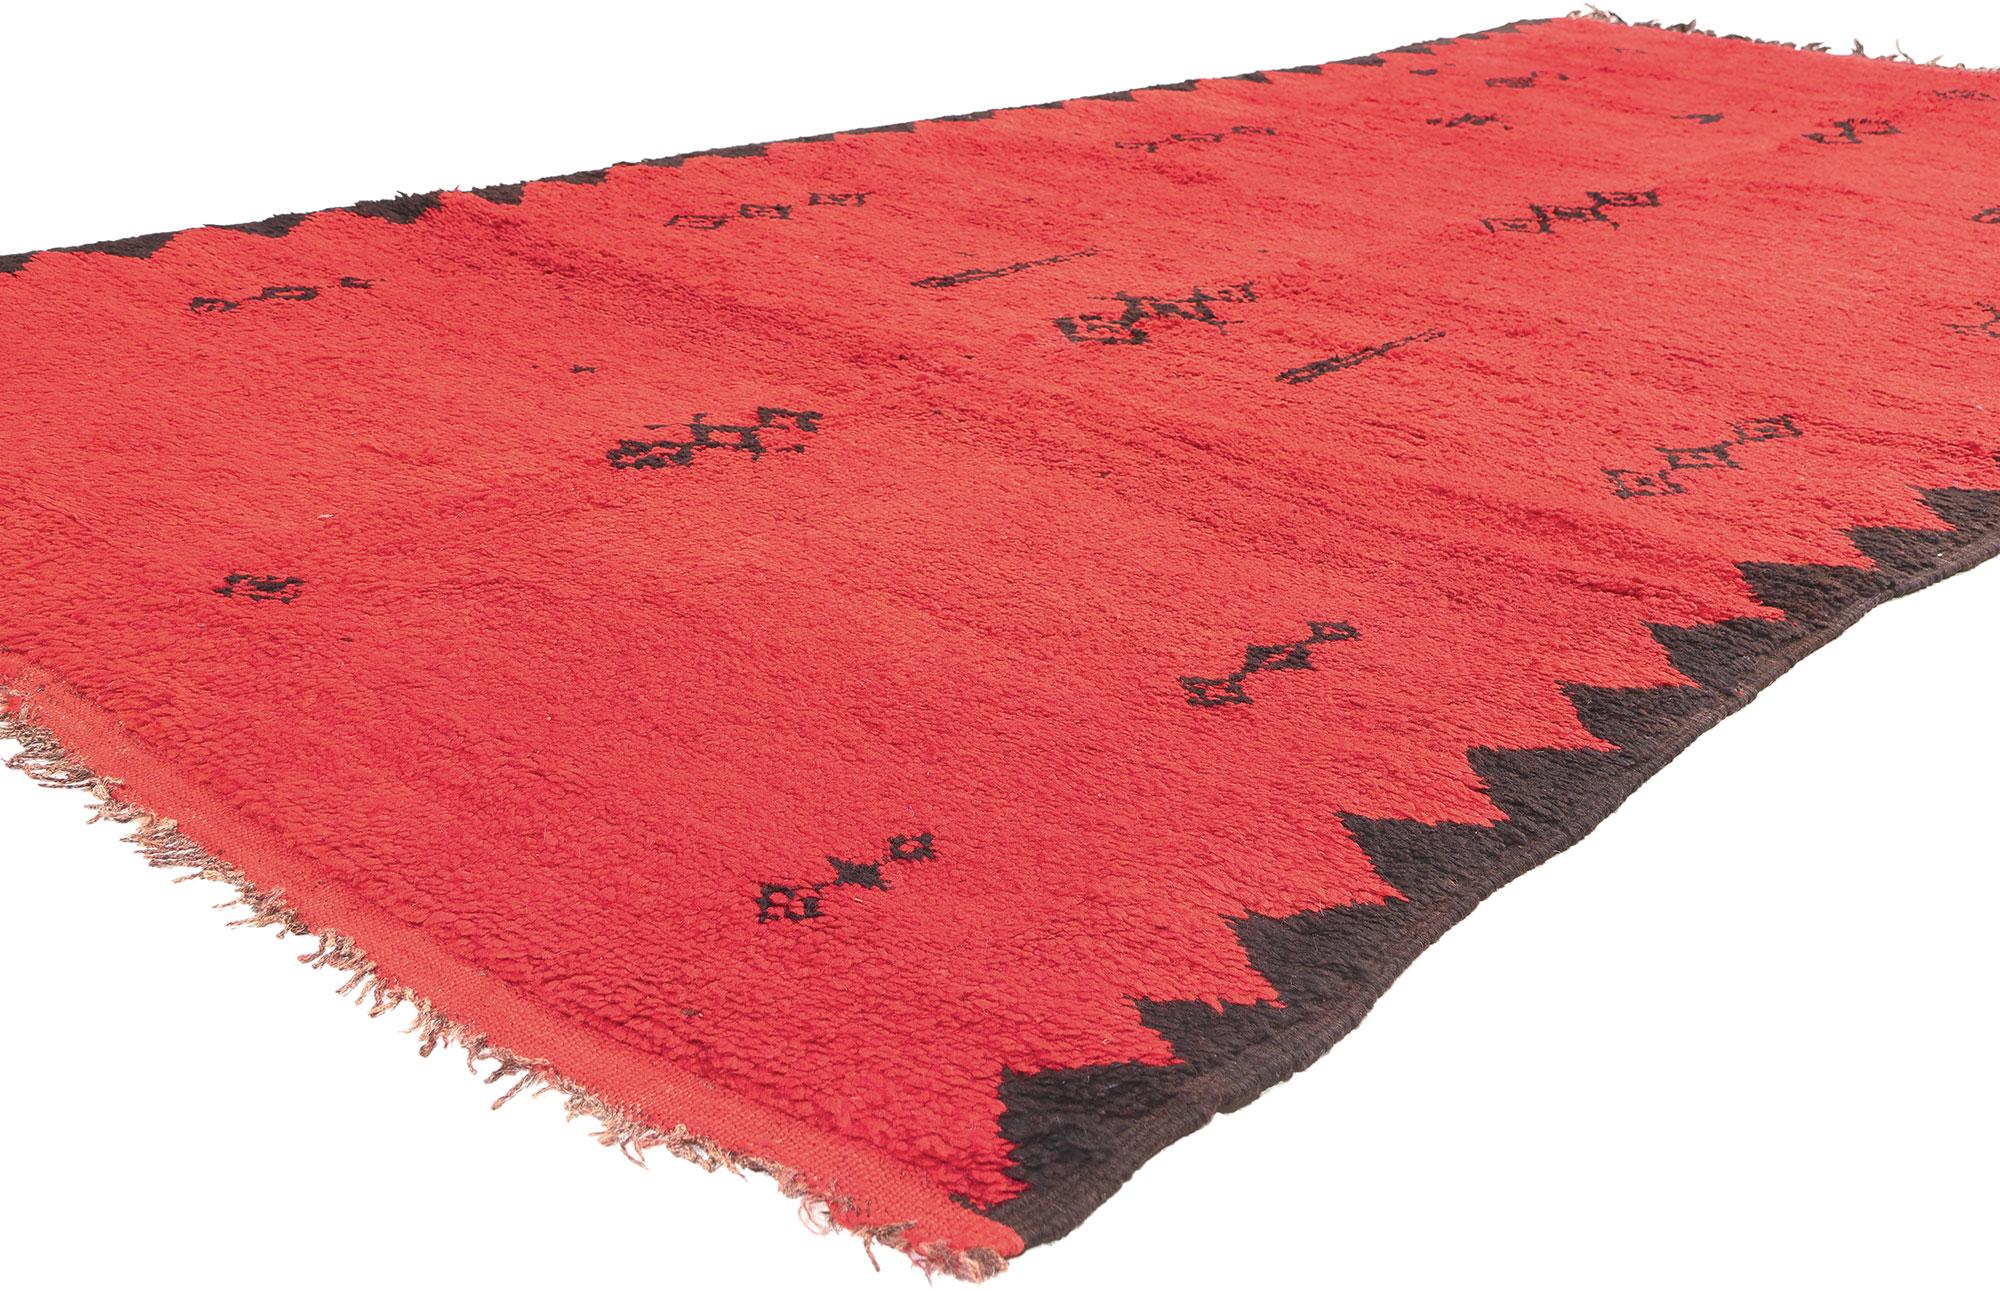 20896 Vintage Red Taznakht Moroccan Rug, 05'01 x 11'00. This vintage Moroccan rug, skillfully hand-knotted from wool, originates from the town of Taznakht nestled in the High Atlas Mountains of Morocco. Renowned for their vibrant earthy hues,